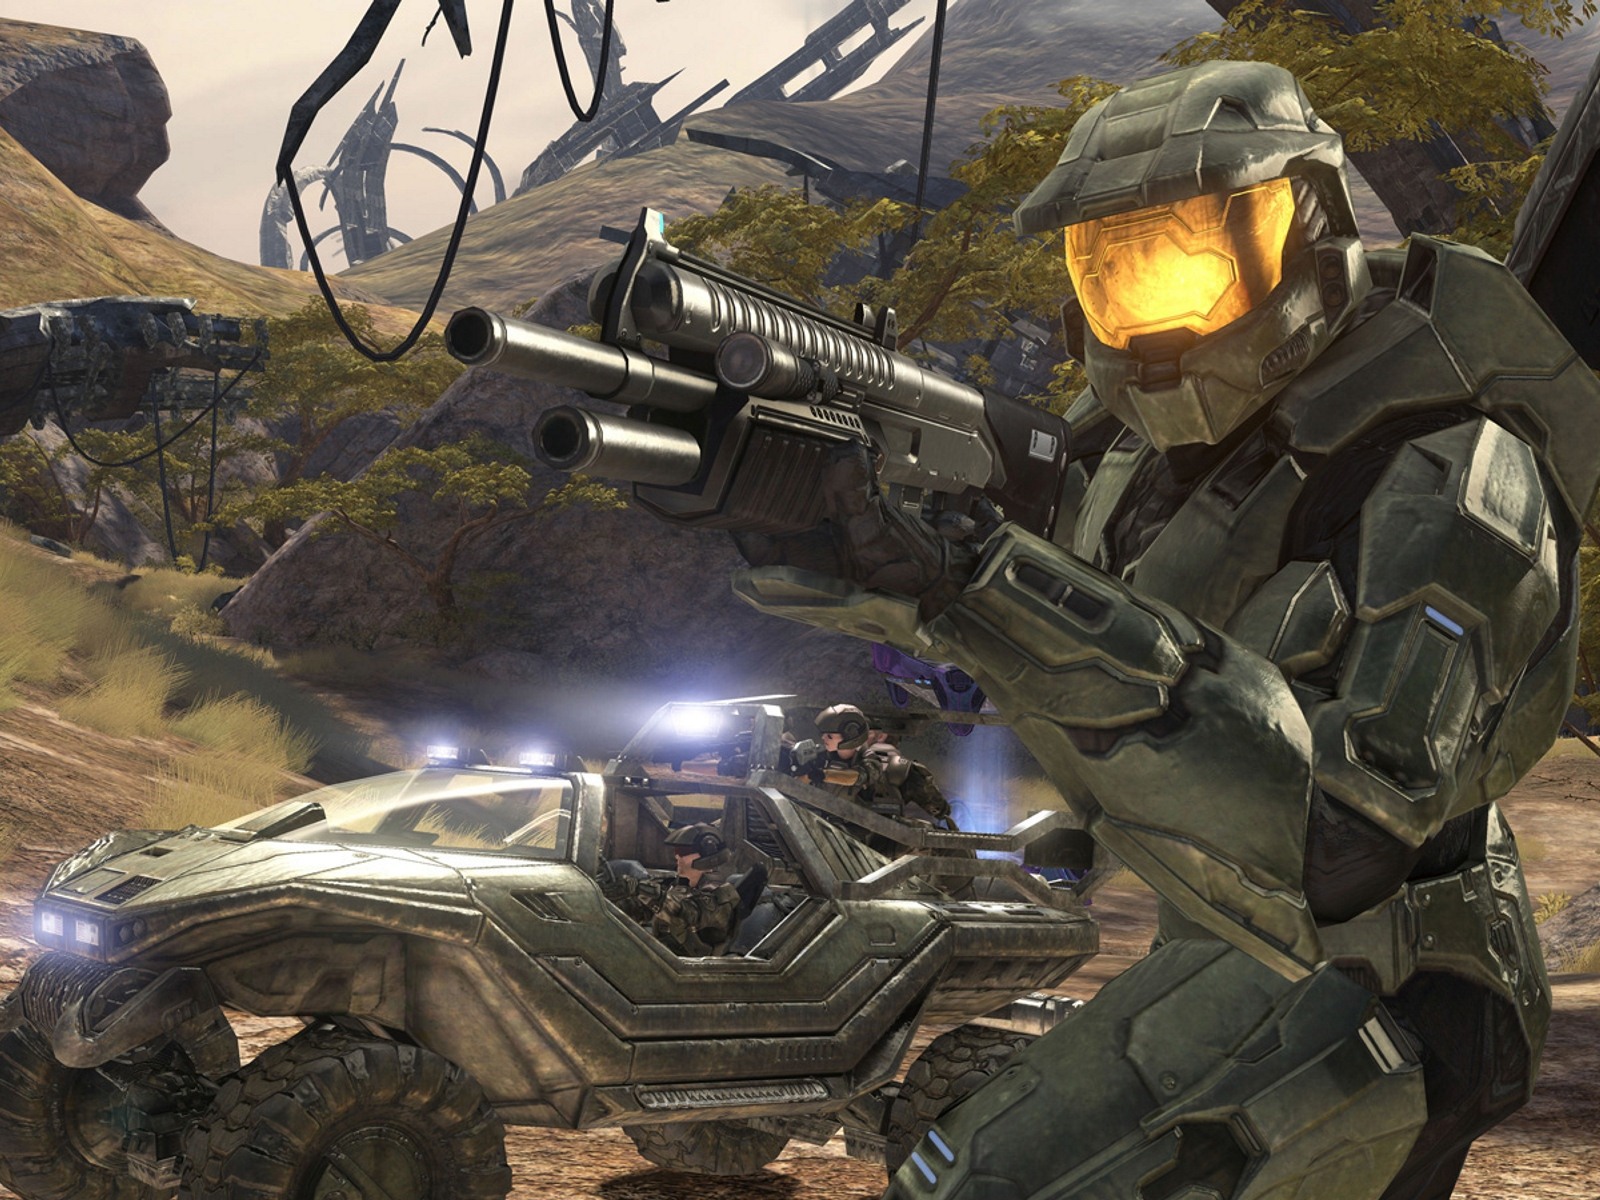 Halo game HD wallpapers #13 - 1600x1200